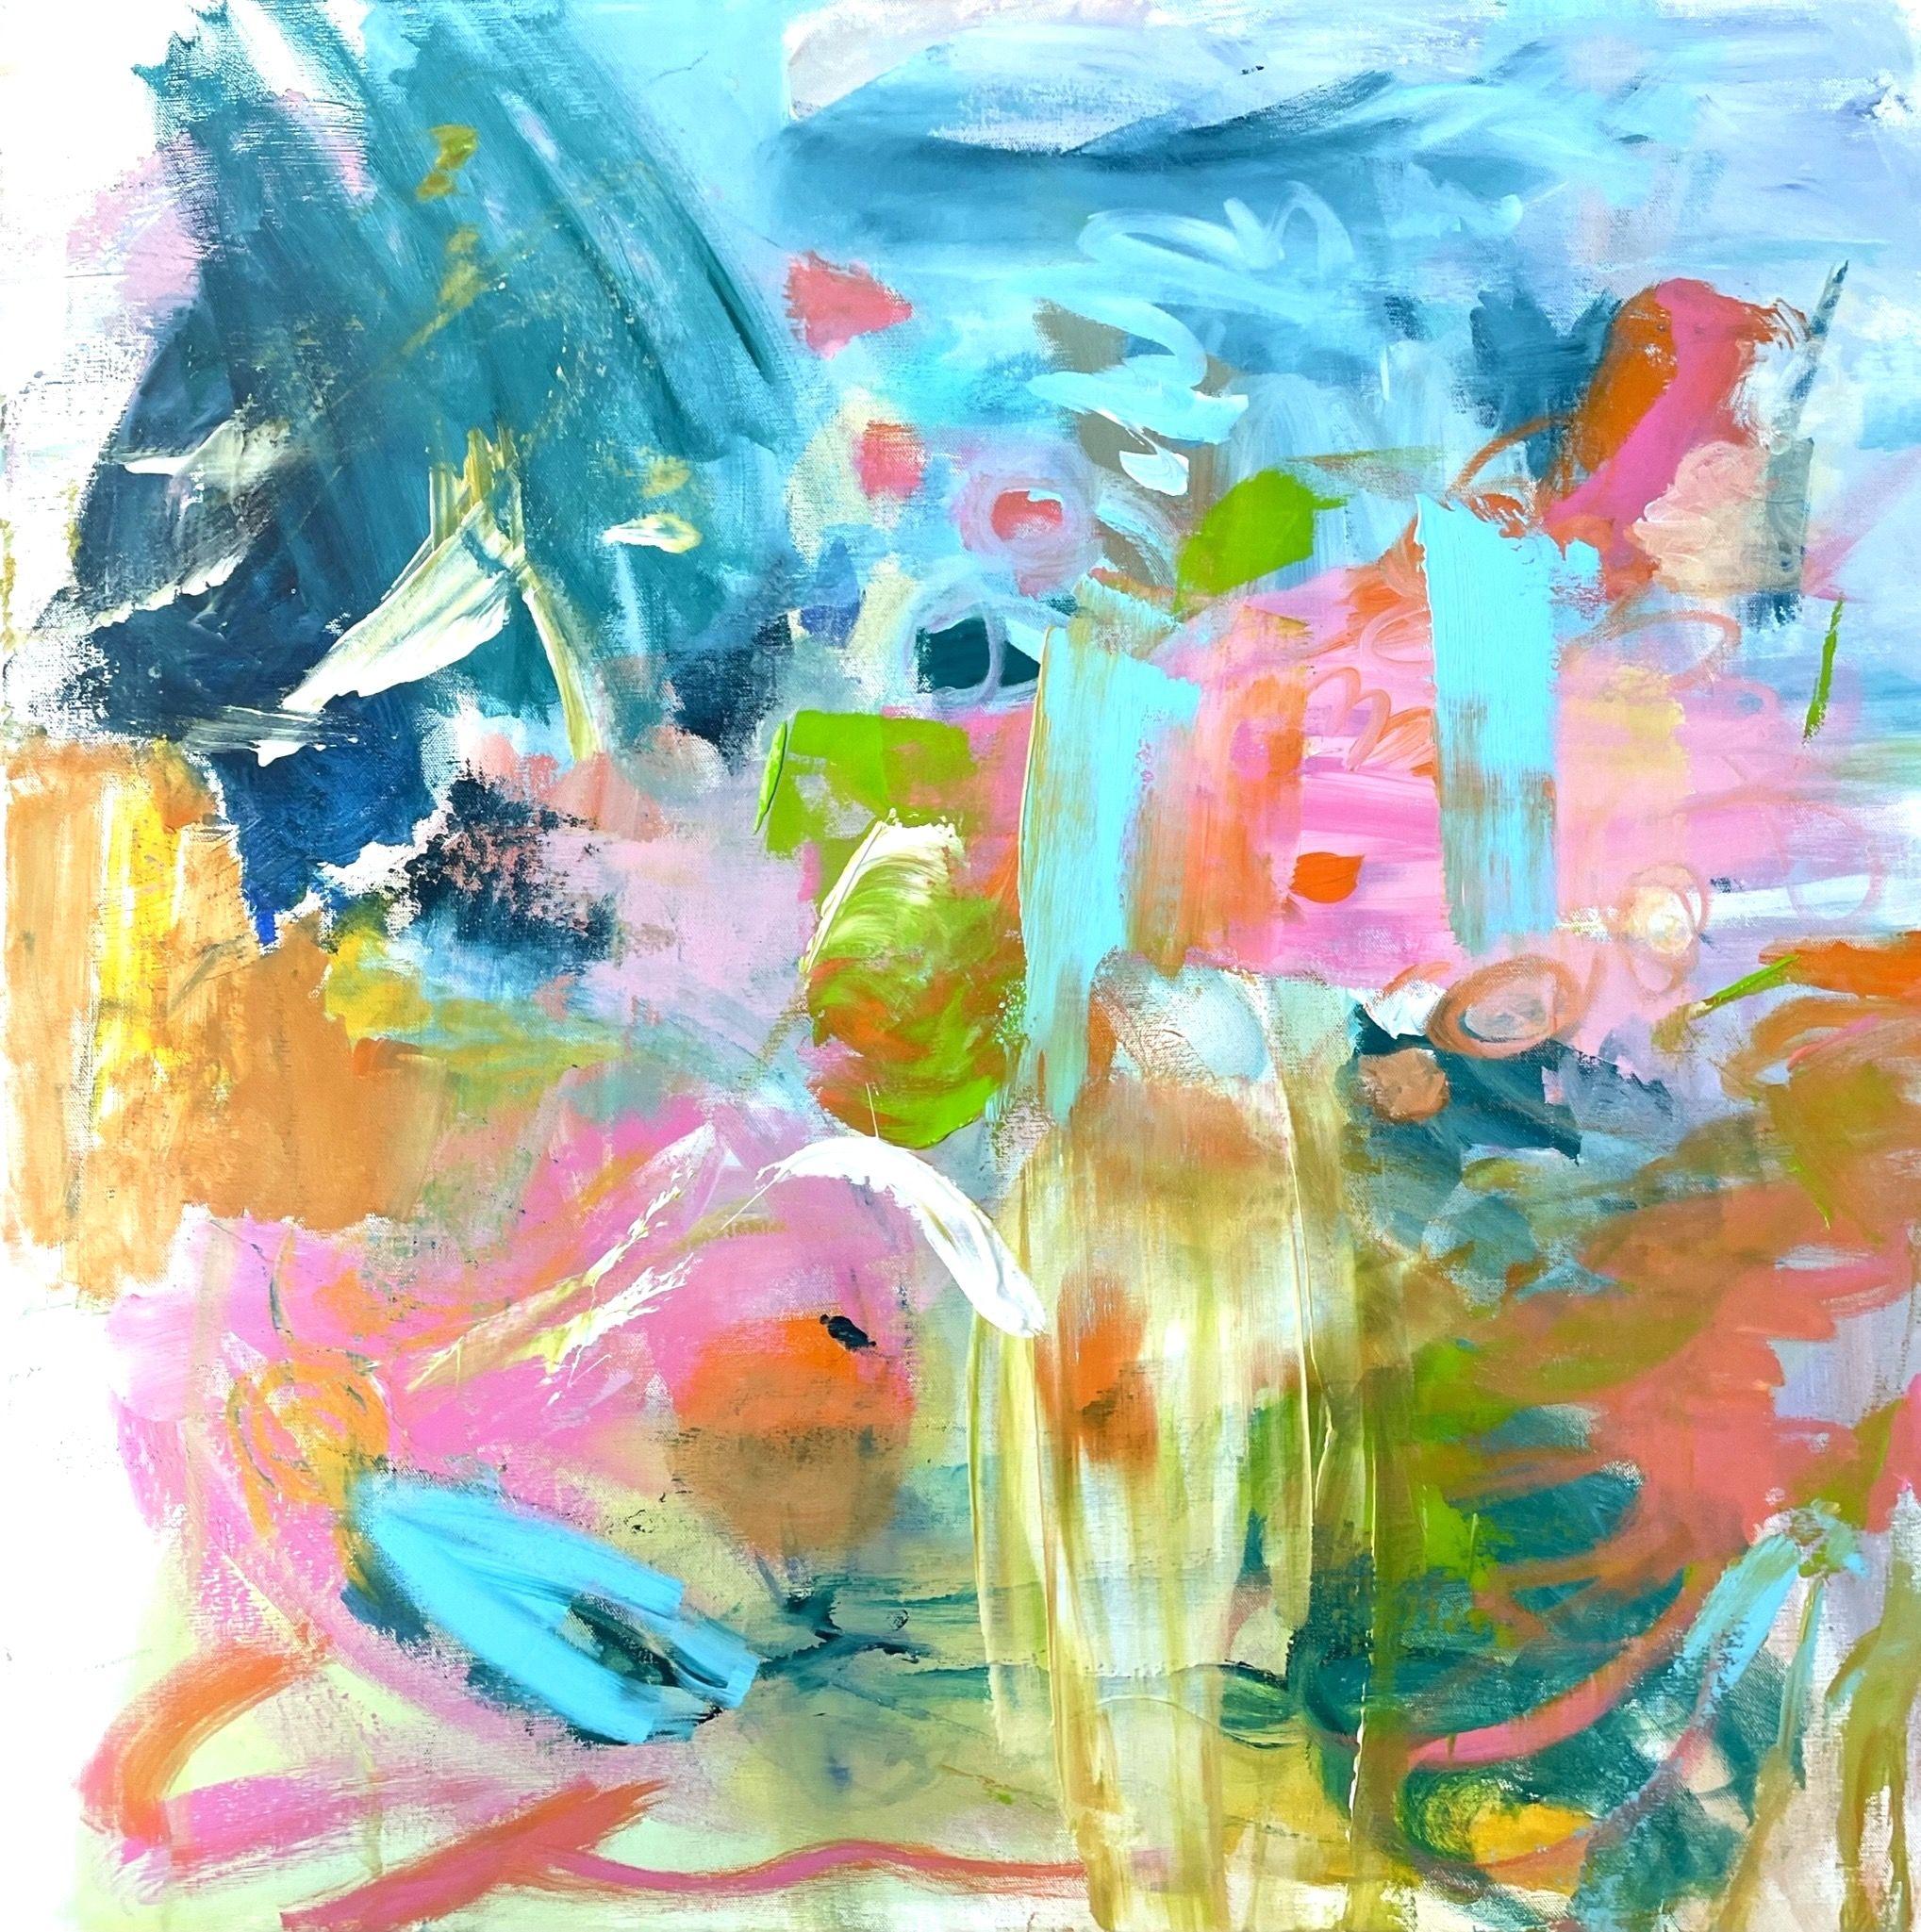 There are days like this when we feel free, carefree and happy. Nothing burdens us - everything is possible.    "Feels Like A Happy Summer Day" is a colorful painting on canvas. It's full of movement and dynamism; soft, but also powerful.    The